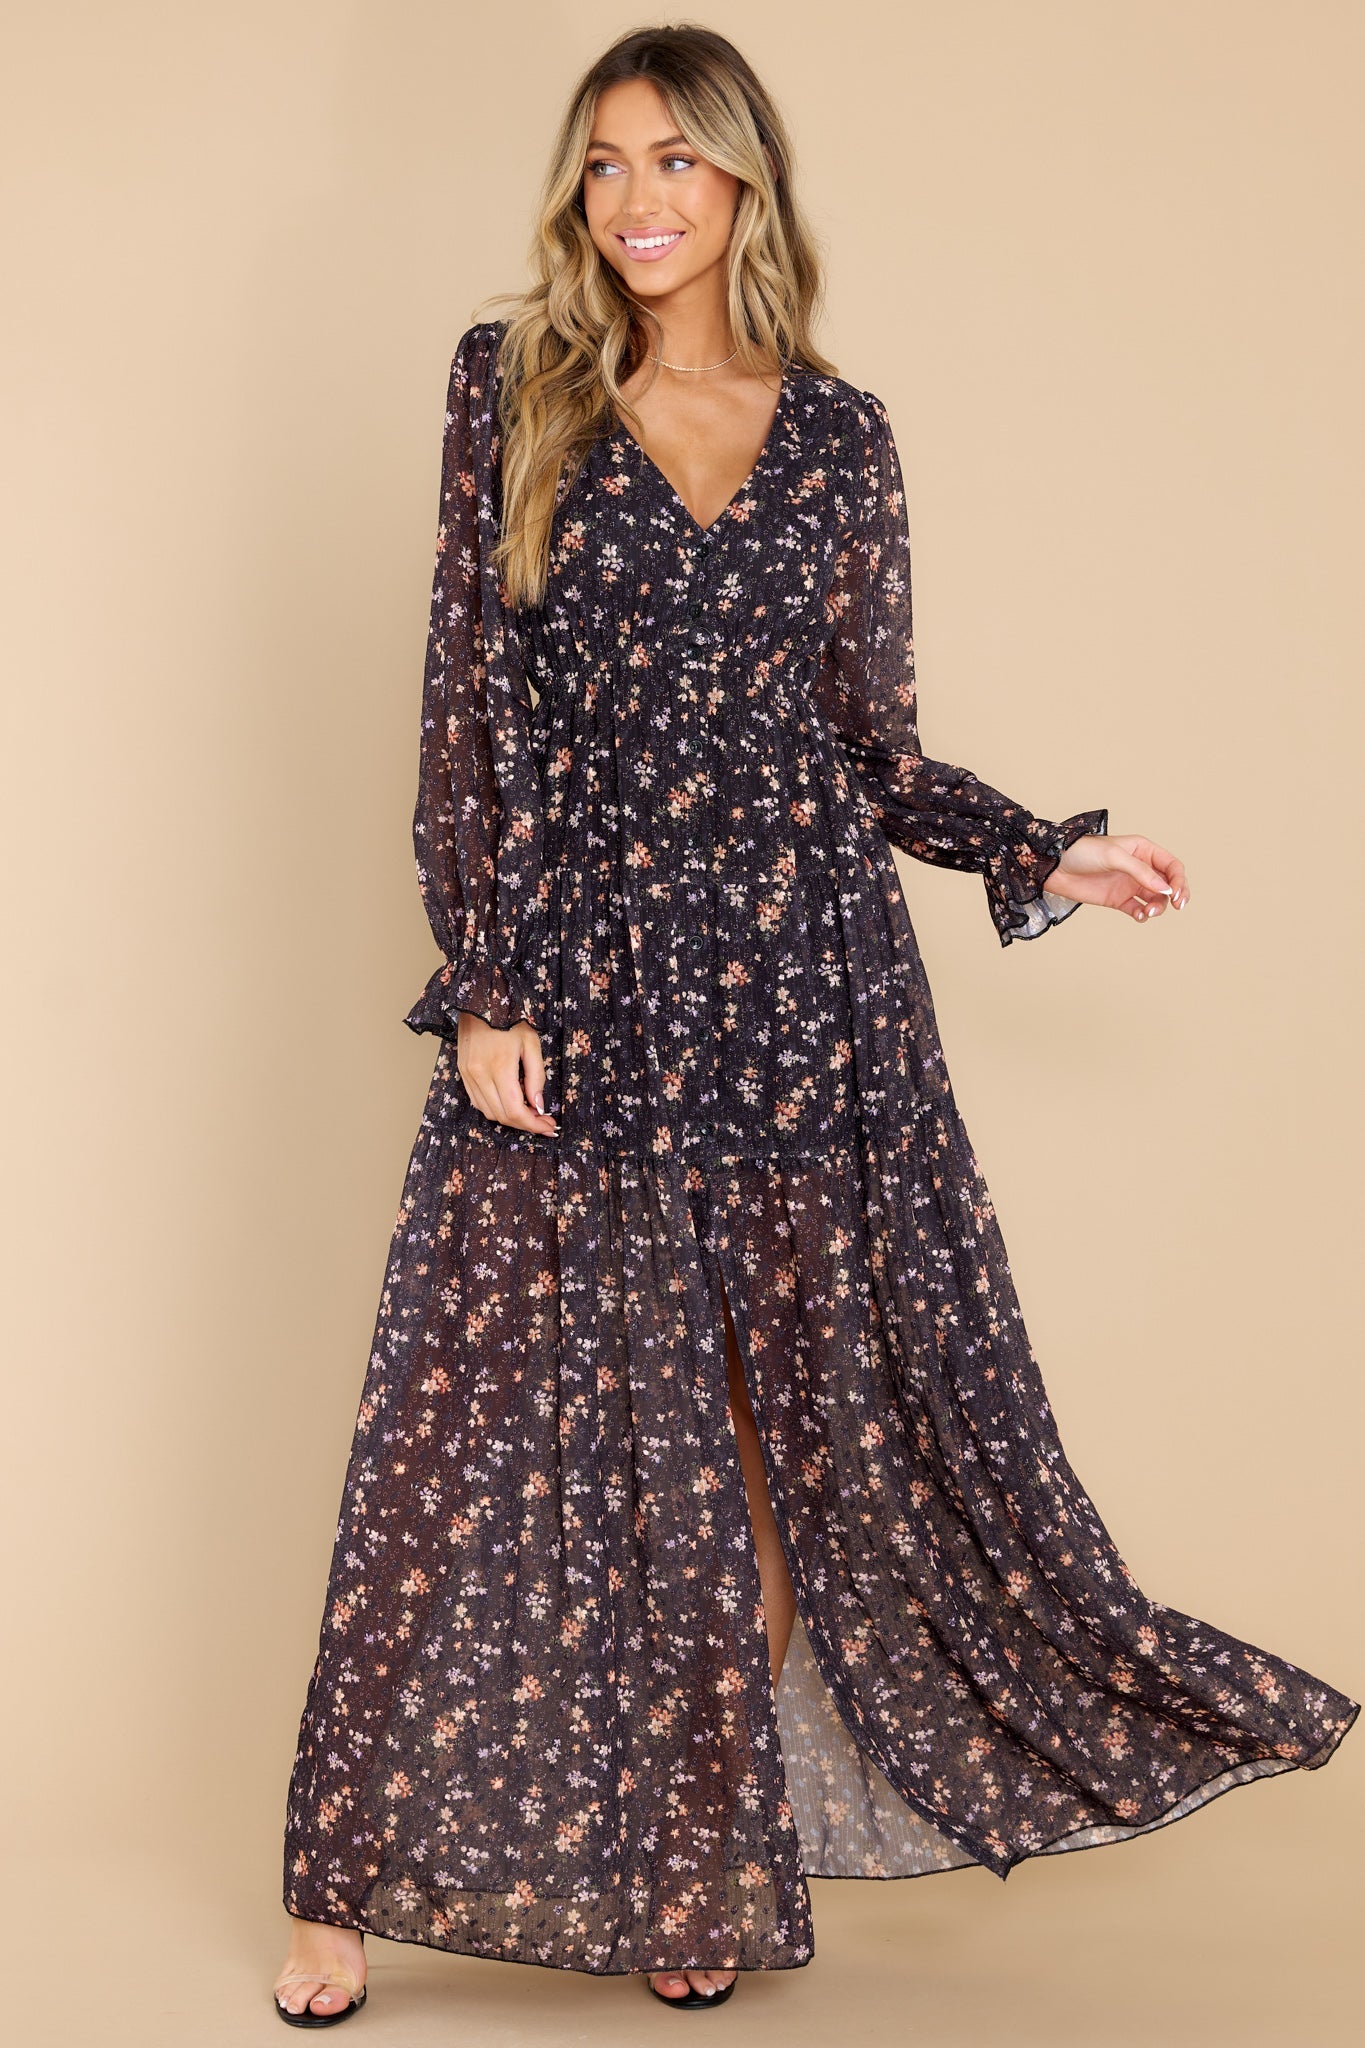 Share Your Story Black Floral Print Maxi Dress - Red Dress